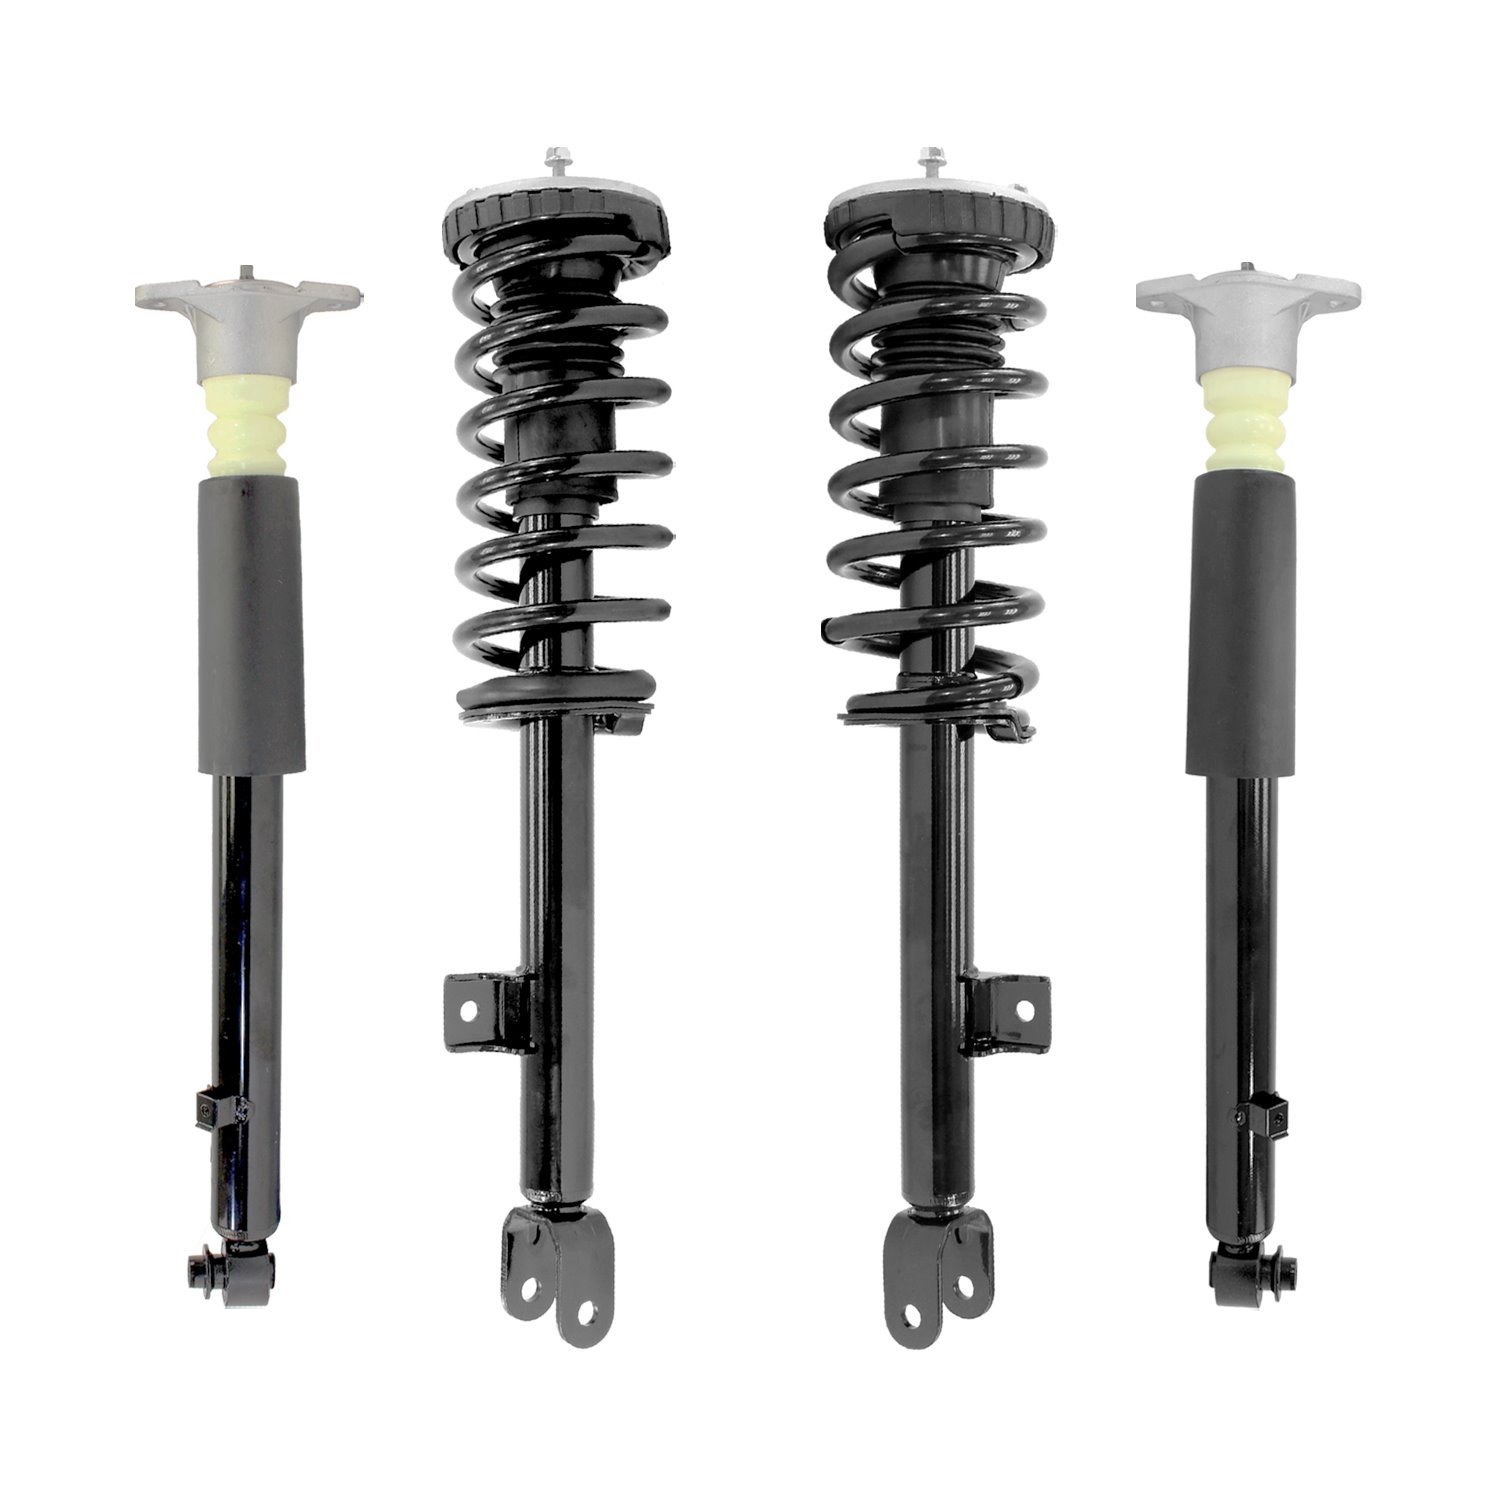 4-13593-259441-001 Front & Rear Complete Strut Assembly Shock Absorber Kit Fits Select Genesis G80, Hyundai Genesis